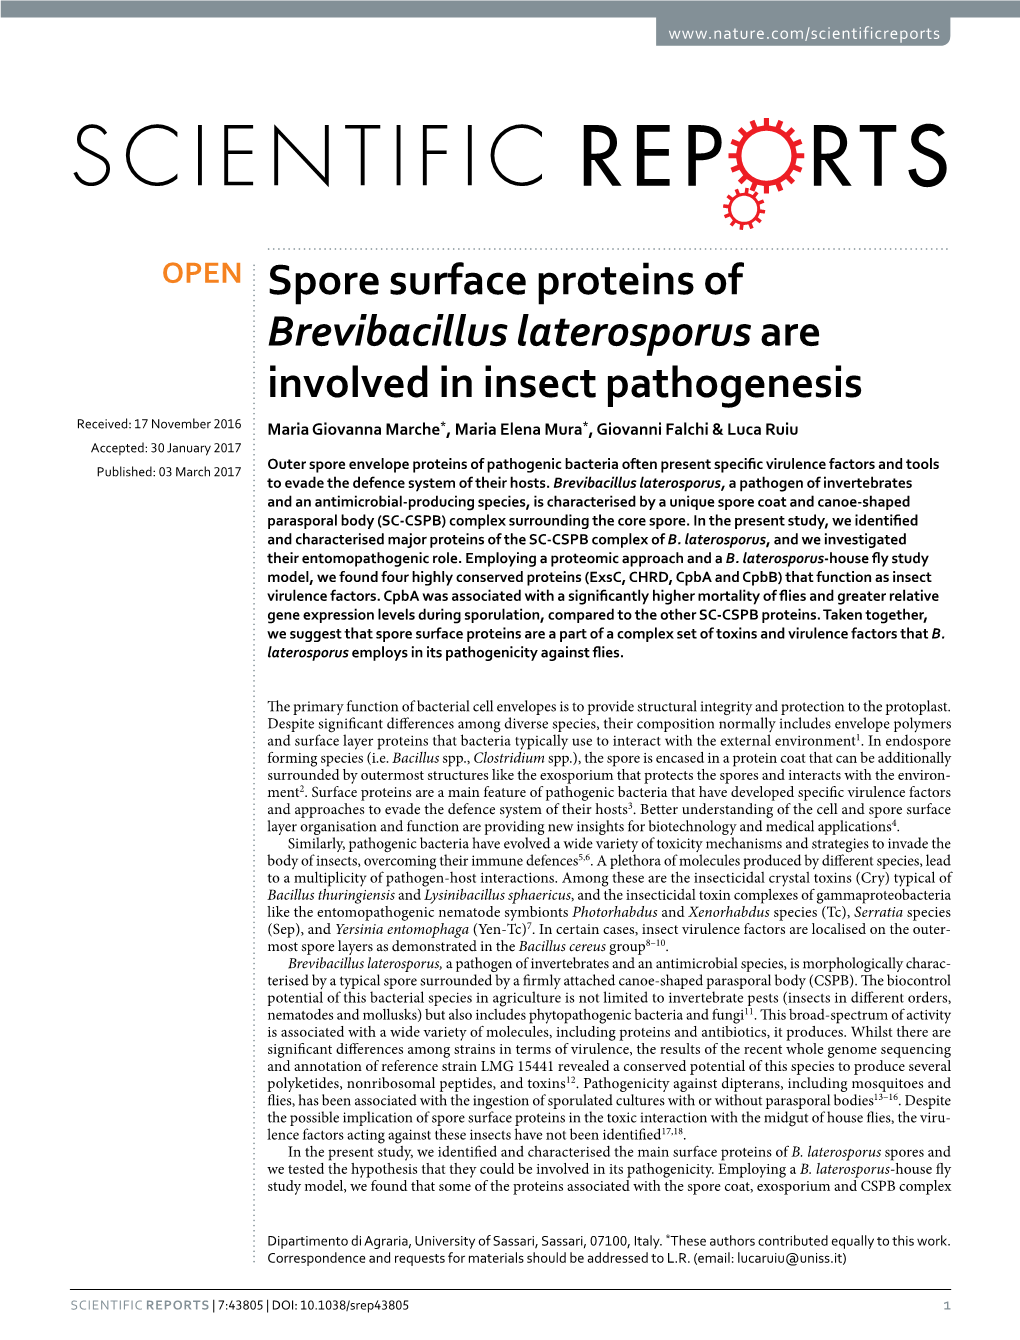 Spore Surface Proteins of Brevibacillus Laterosporus Are Involved in Insect